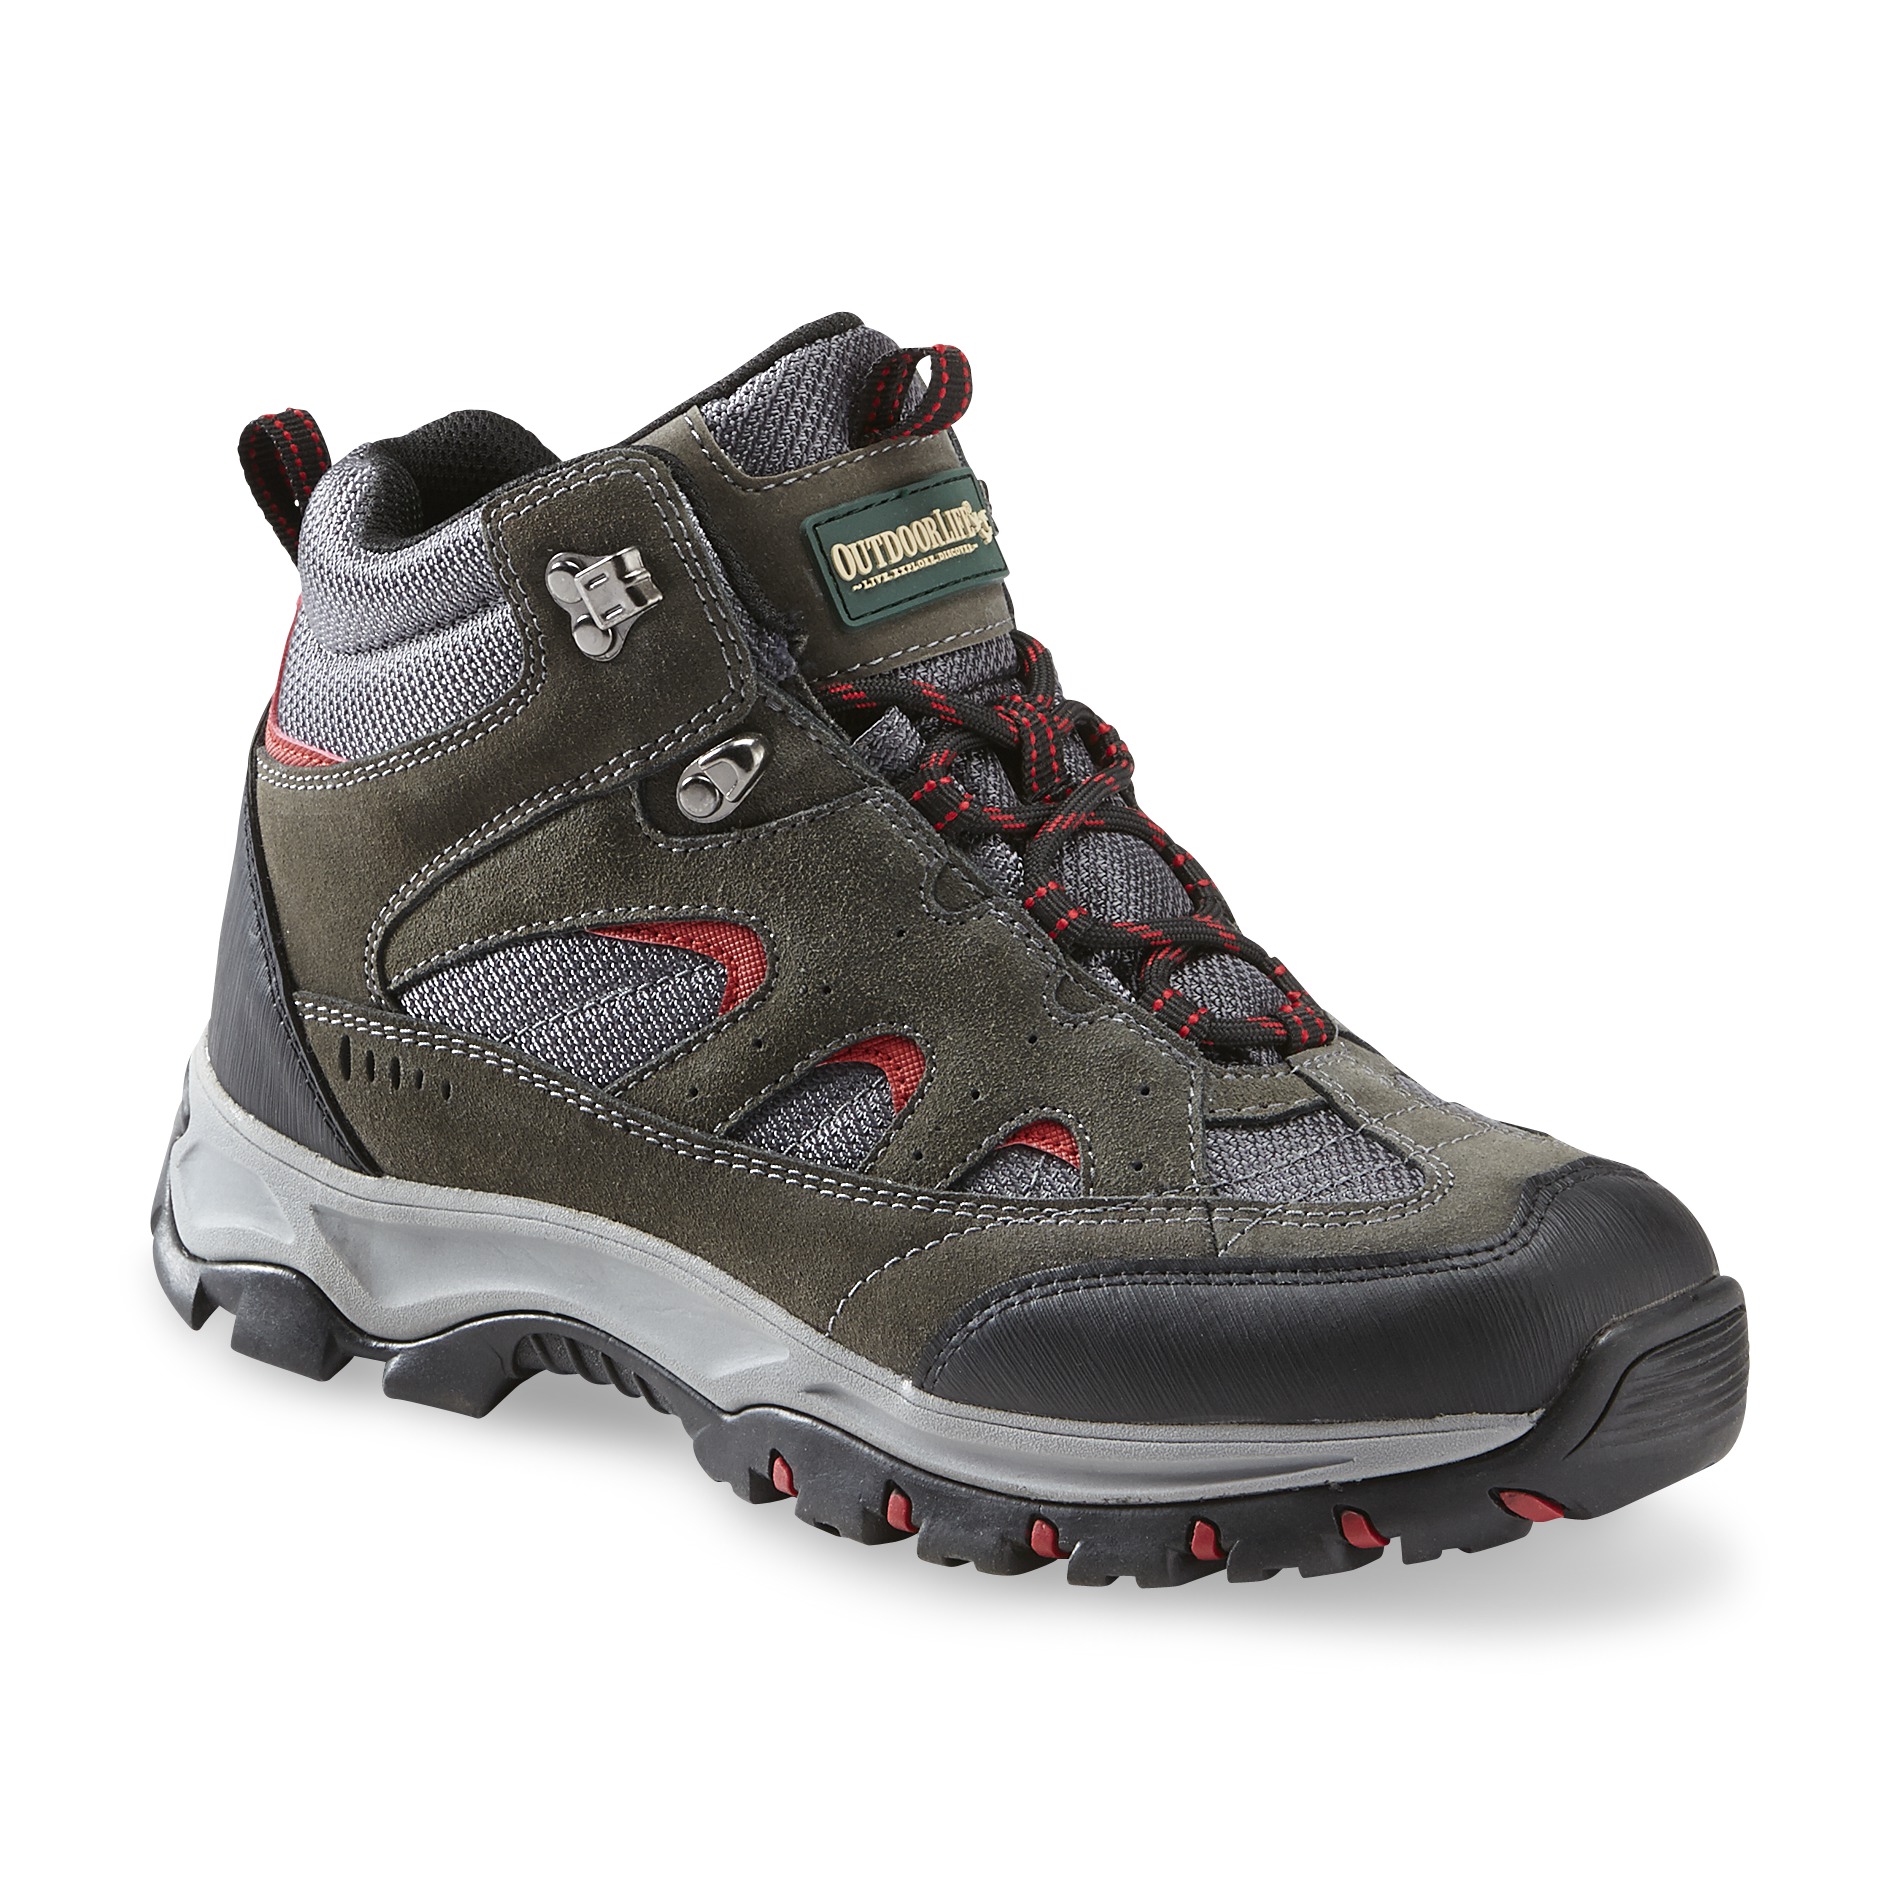 Outdoor Life Hiking Boots 50% OFF + $10/$50 Shoes + $10 in SYWR Points!